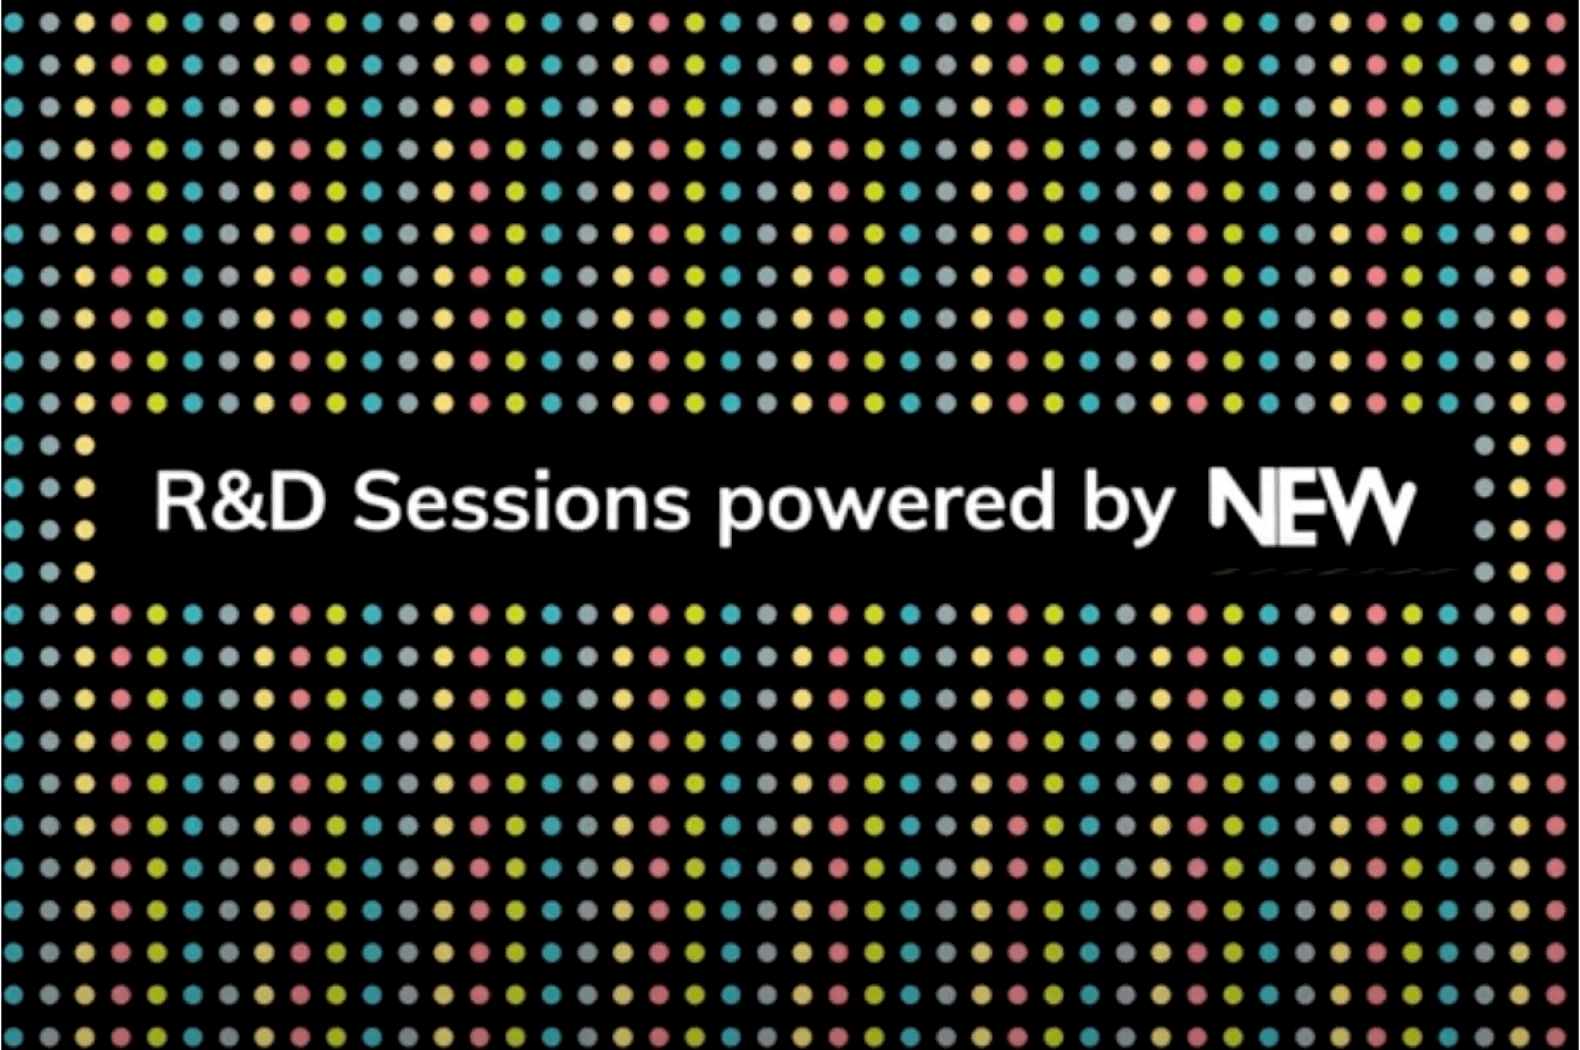 r&d sessions powered by new